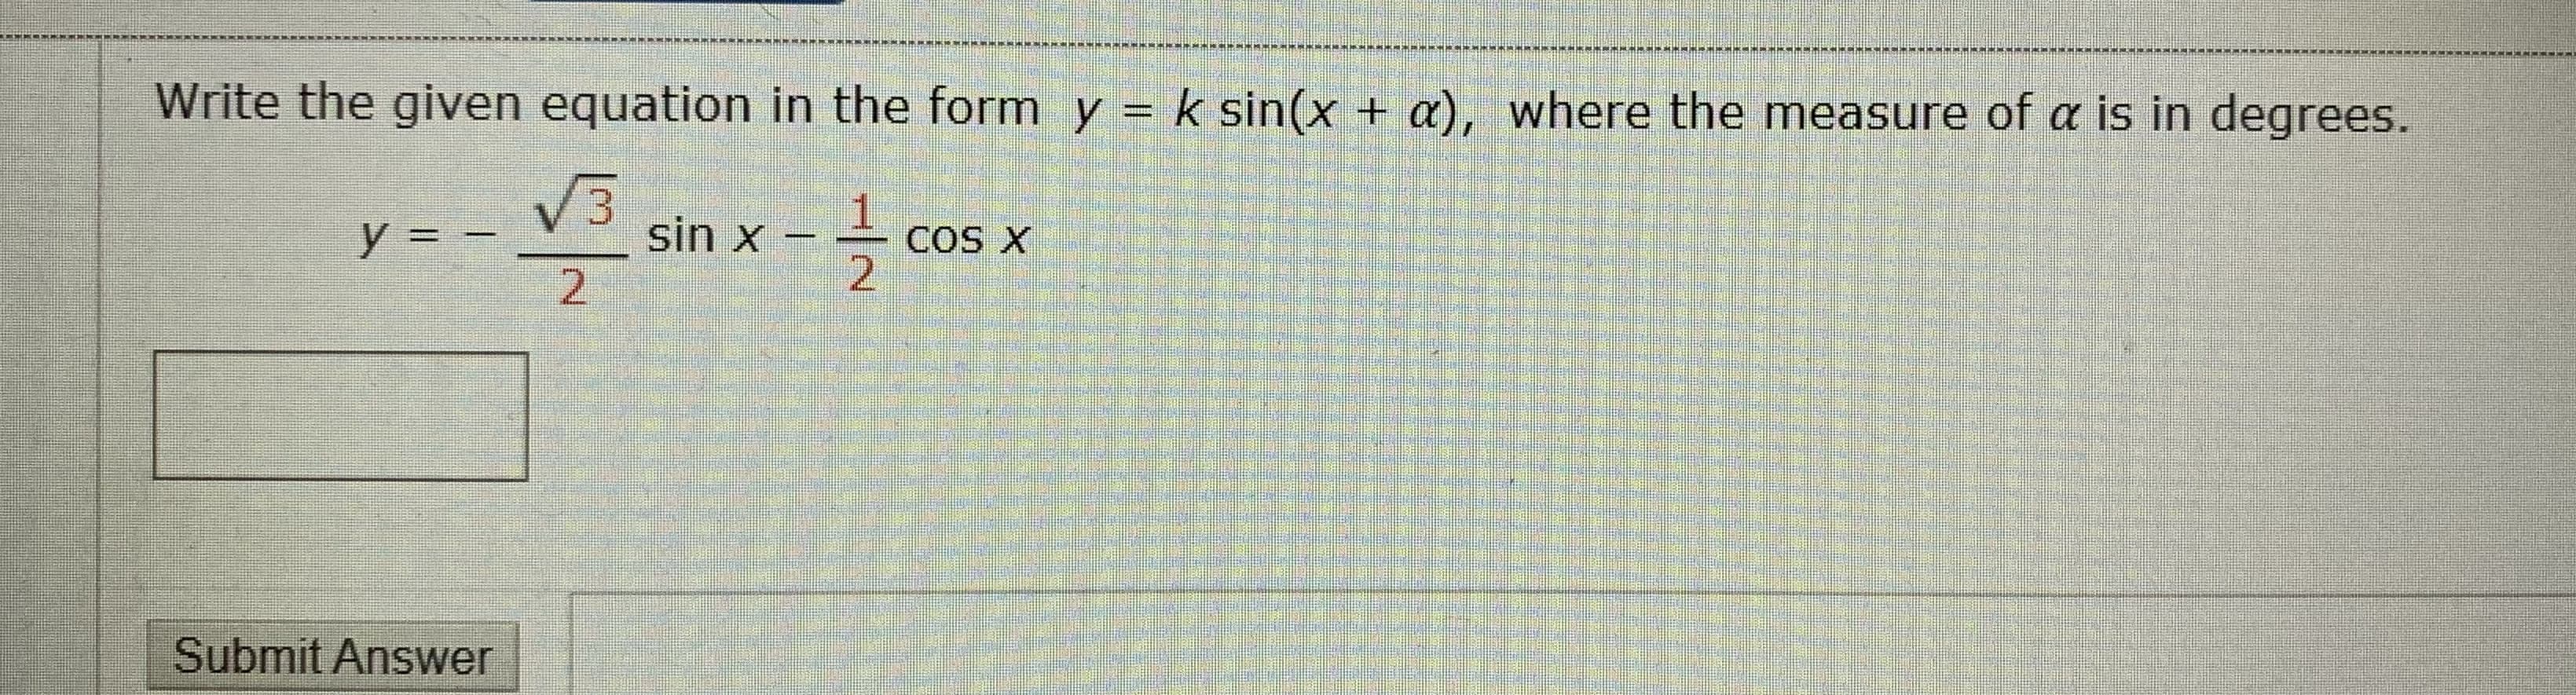 Write the given equation in the form y = k sin(x + a), where the measure of a is in degrees.
V3
sin x -
2
y = –
COS X
